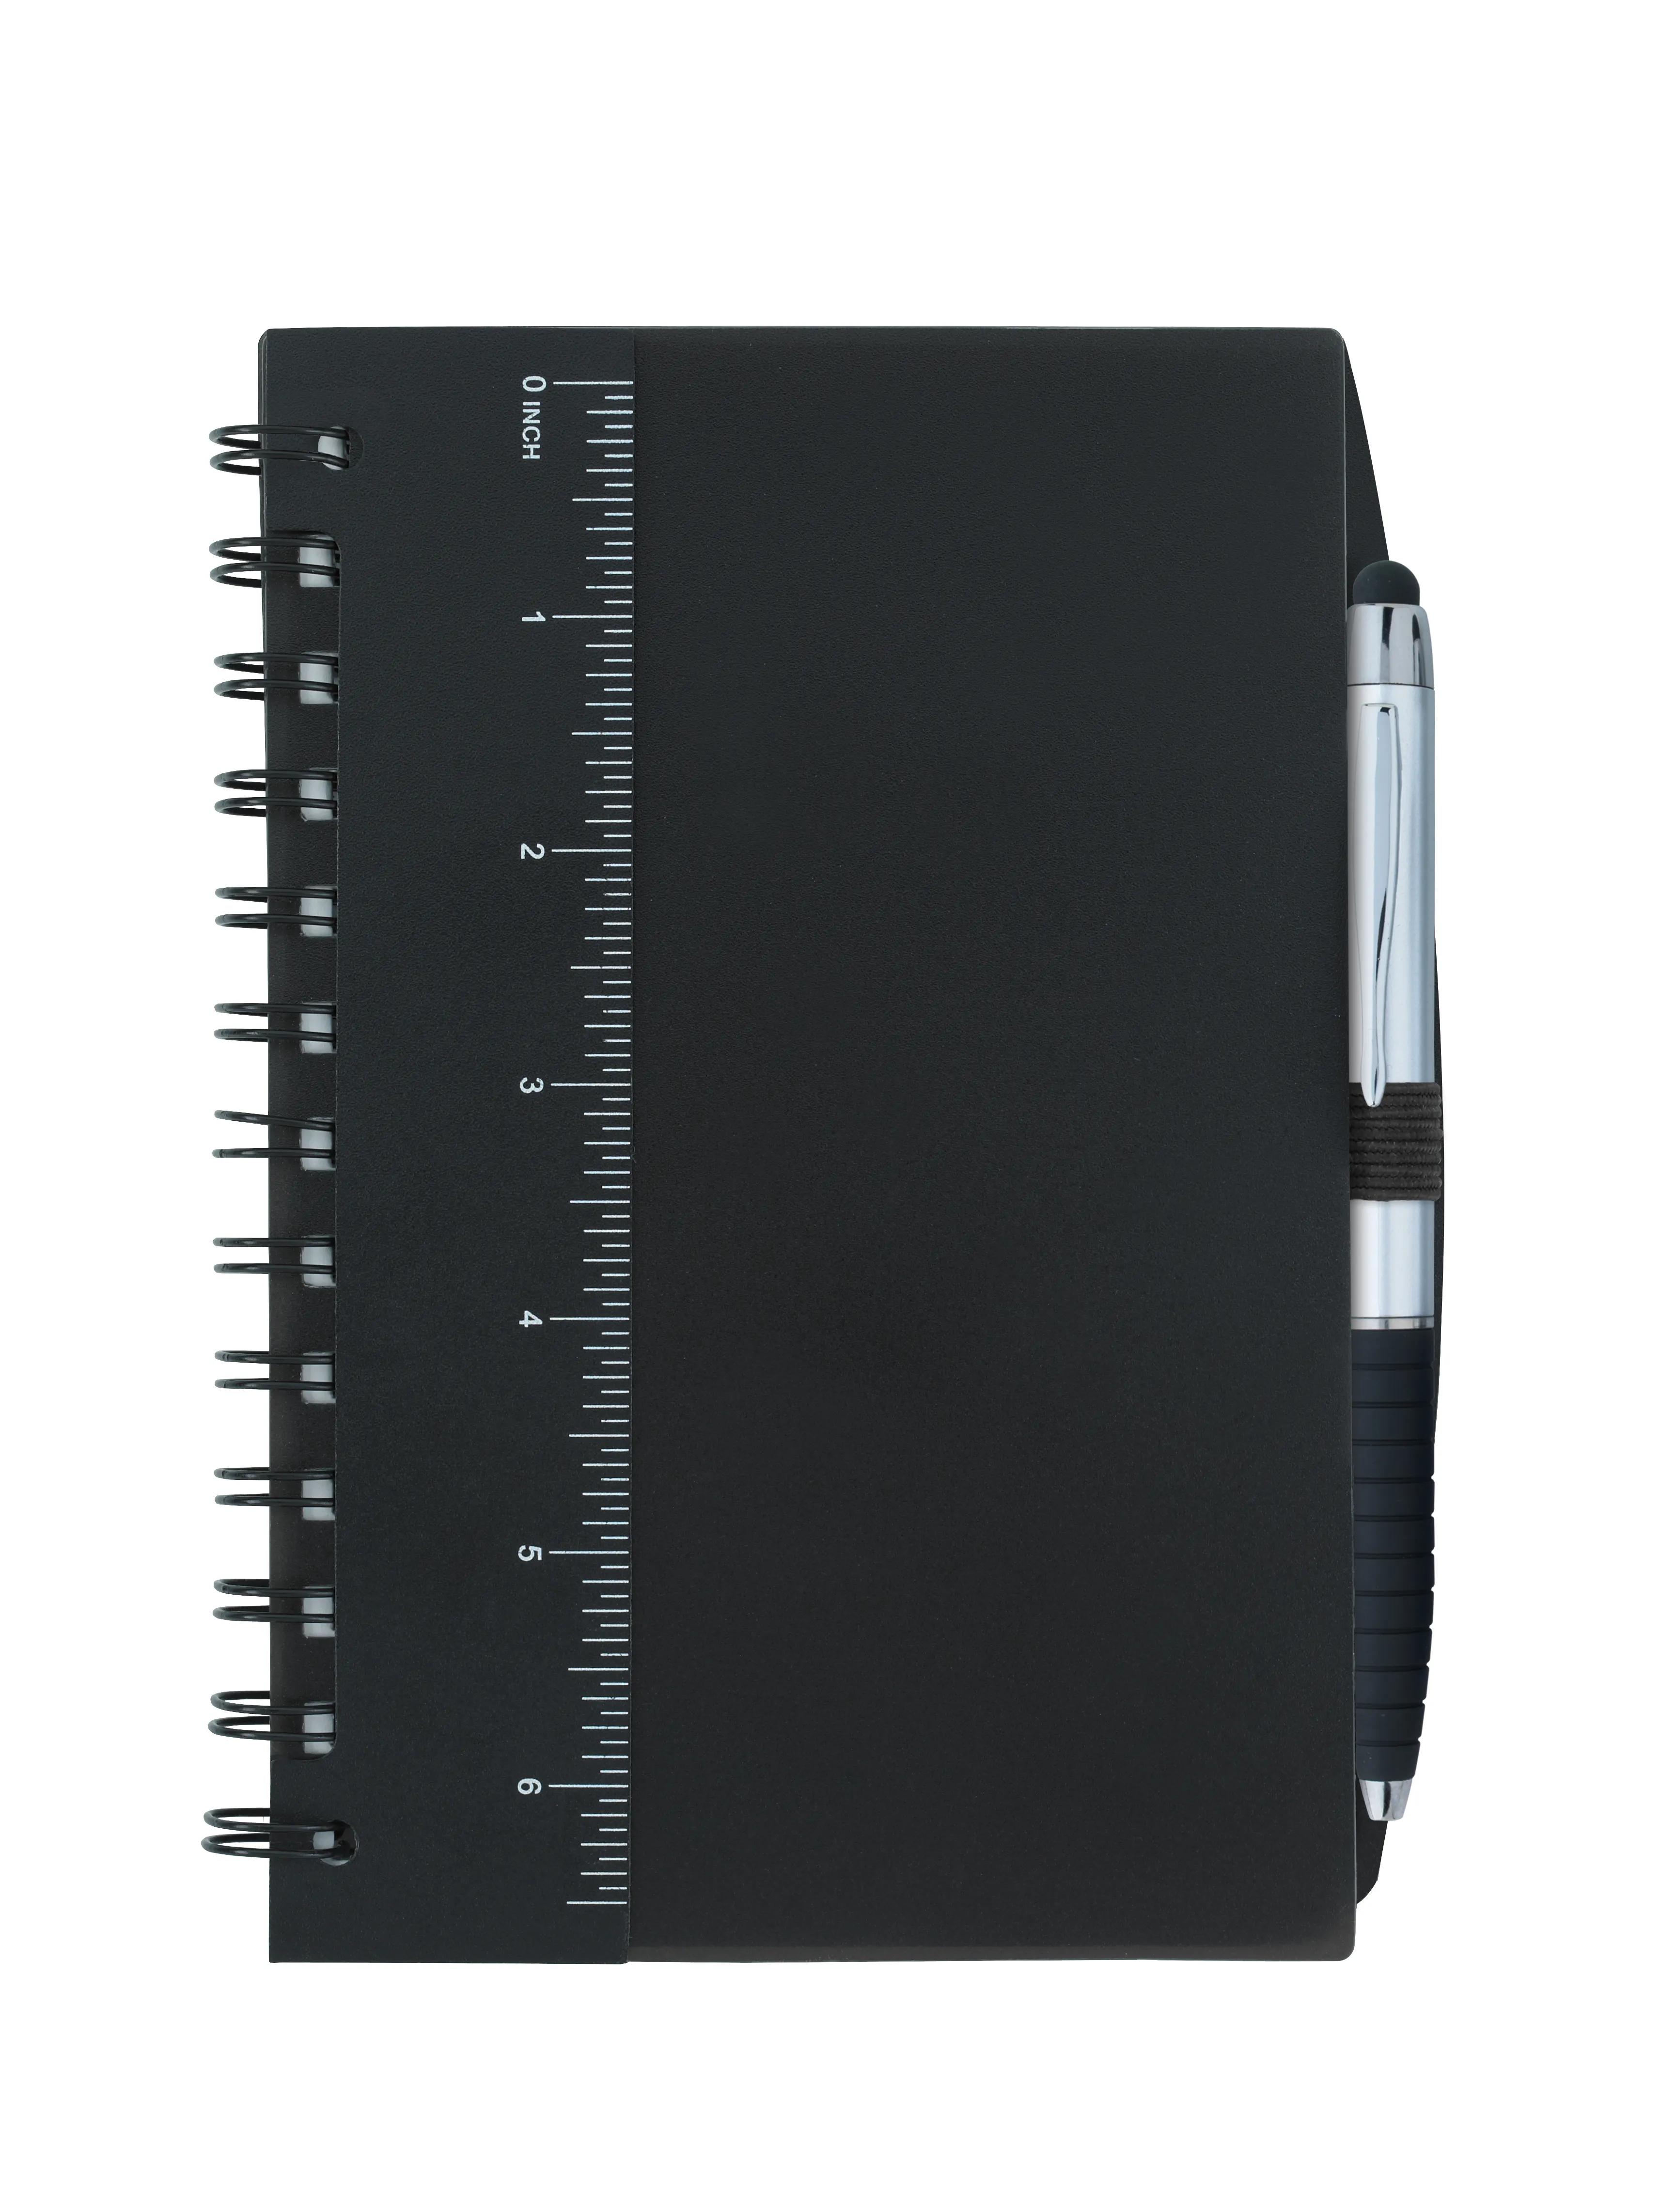 5” x 7” Ruler Notebook with Flags and Stylus Pen 5 of 11